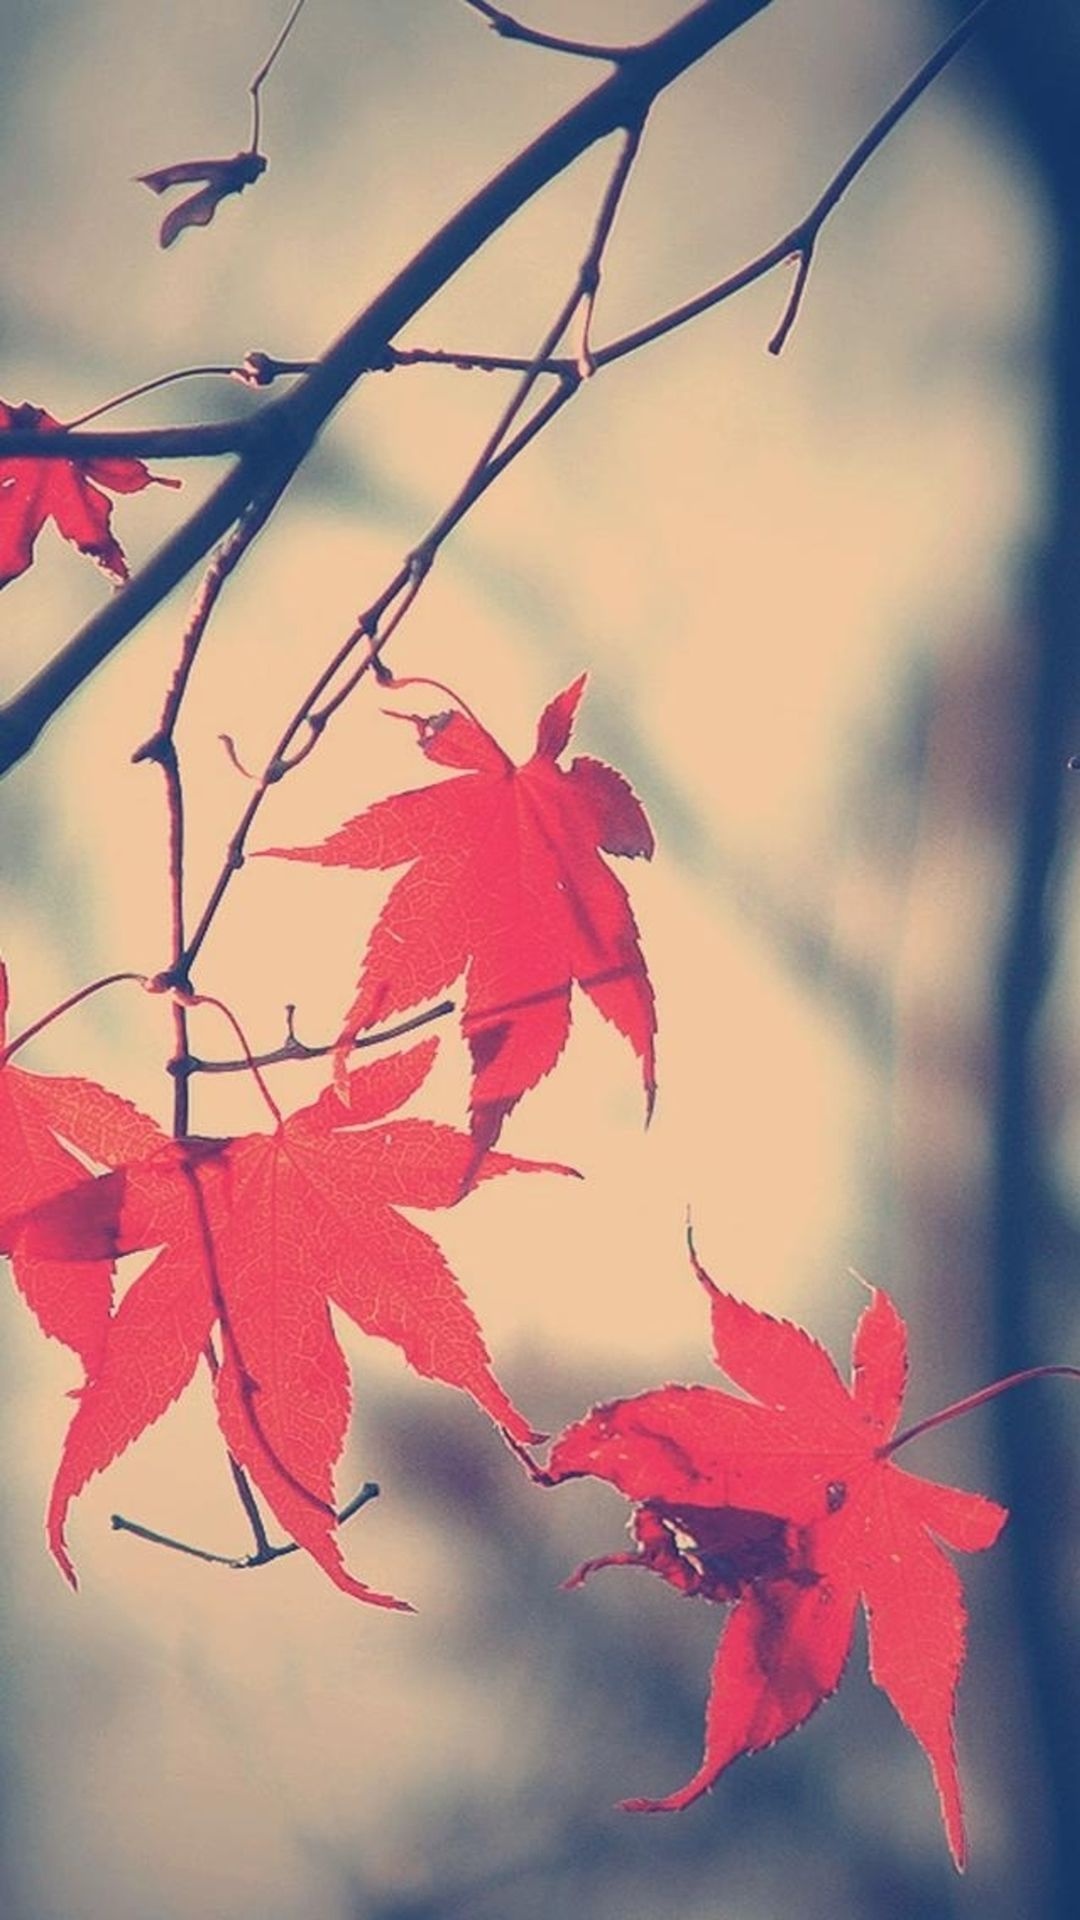 Maple leaf branch, Autumn romance, Whispers of love, Nature's embrace, 1080x1920 Full HD Handy